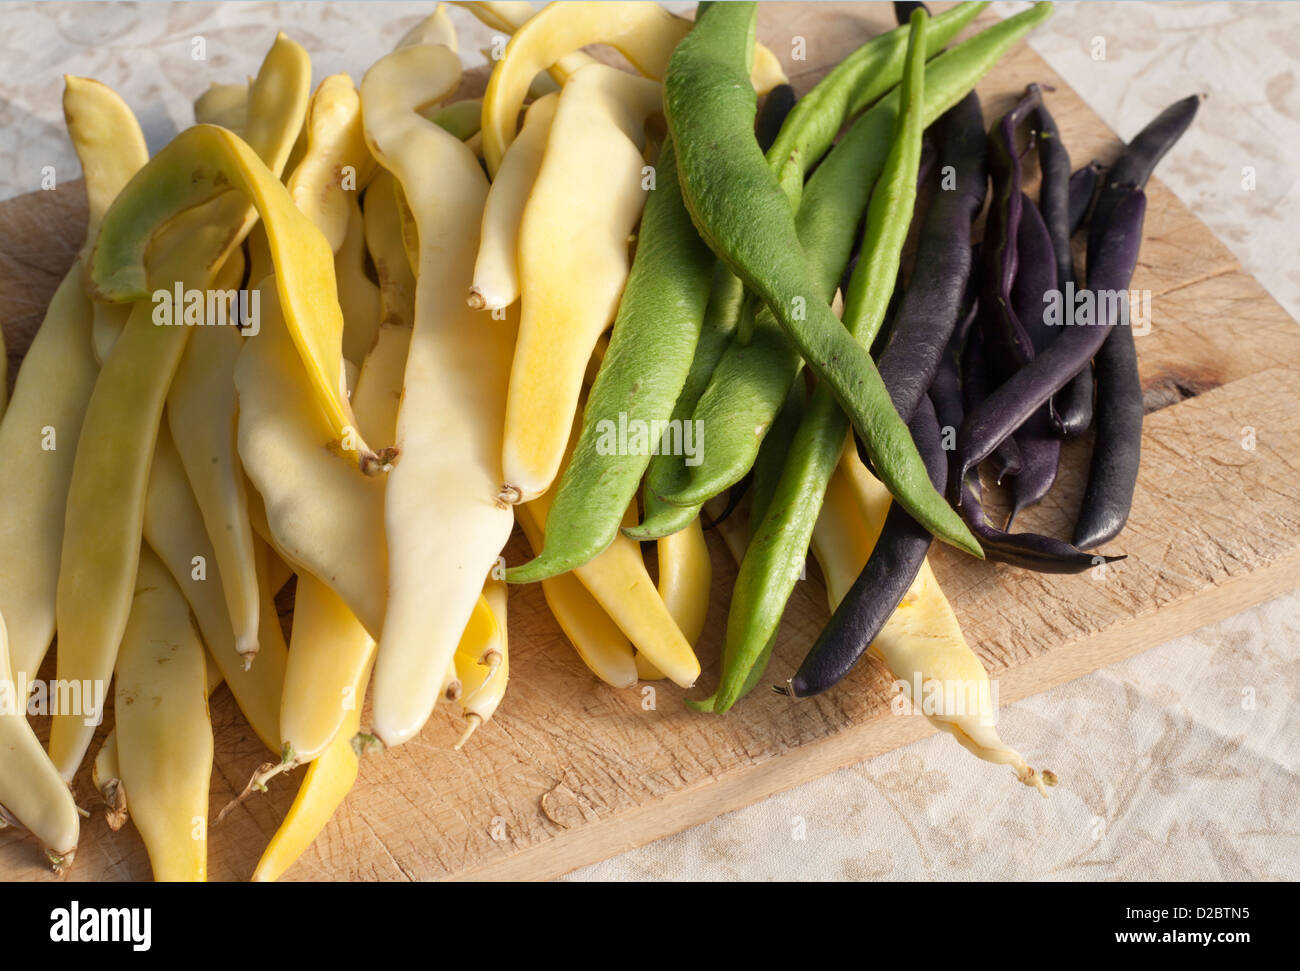 Organic runner beans in green,black and cream on a chopping board Stock Photo